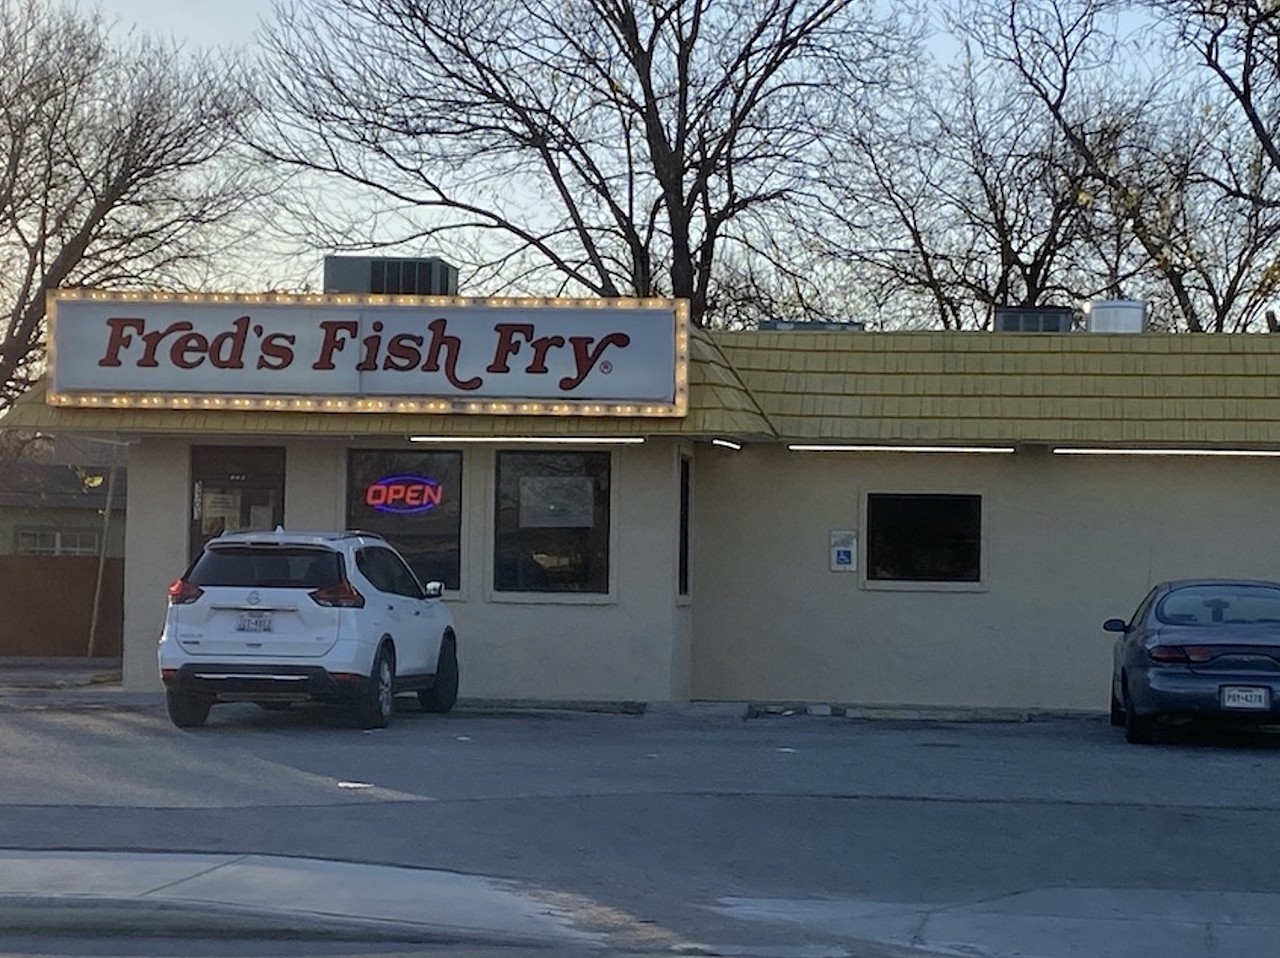 Any time you drive by a Fred's Fish Fry, someone has to make a joke about it being a front for drug money.